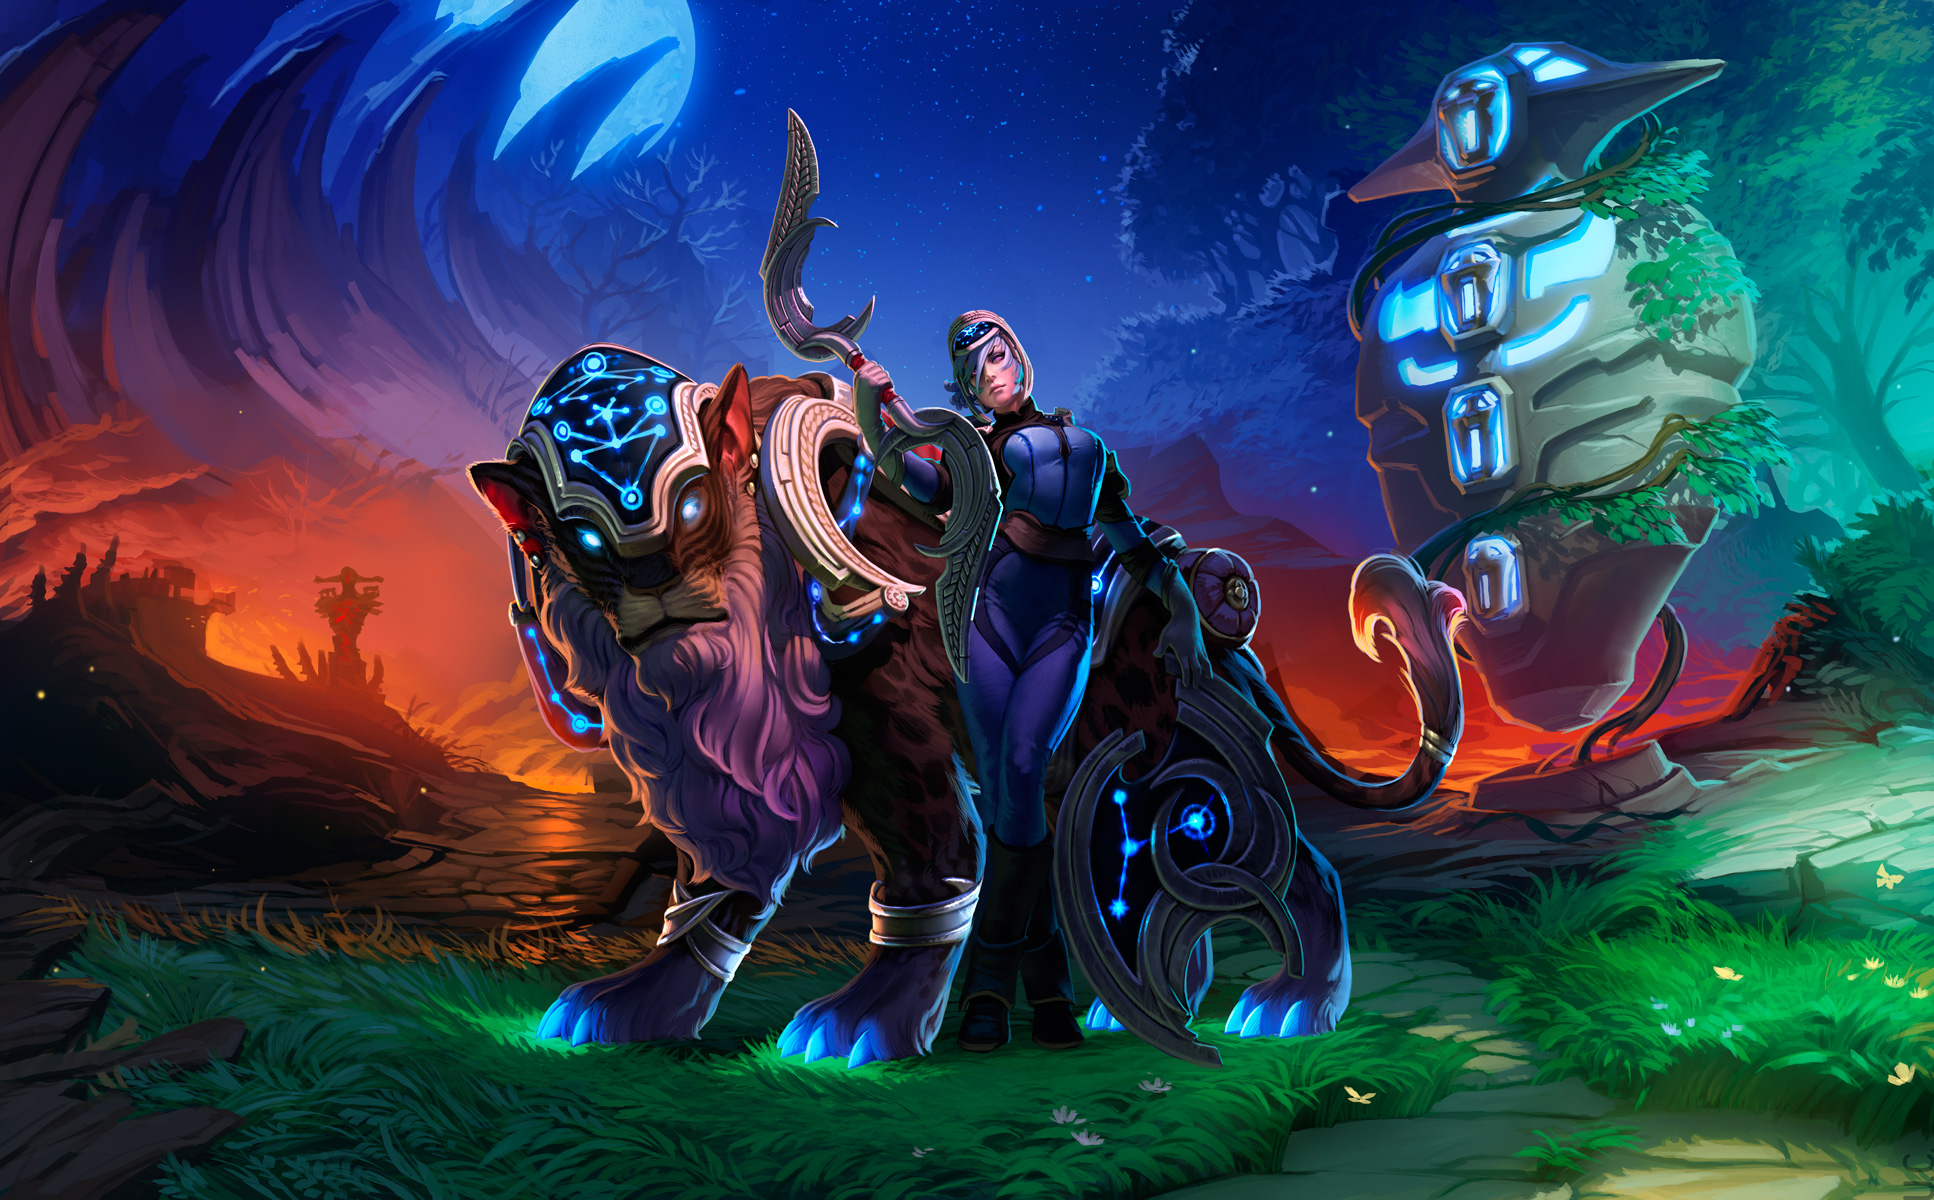 dota 2 wallpapers hd,action adventure game,illustration,cg artwork,fictional character,games